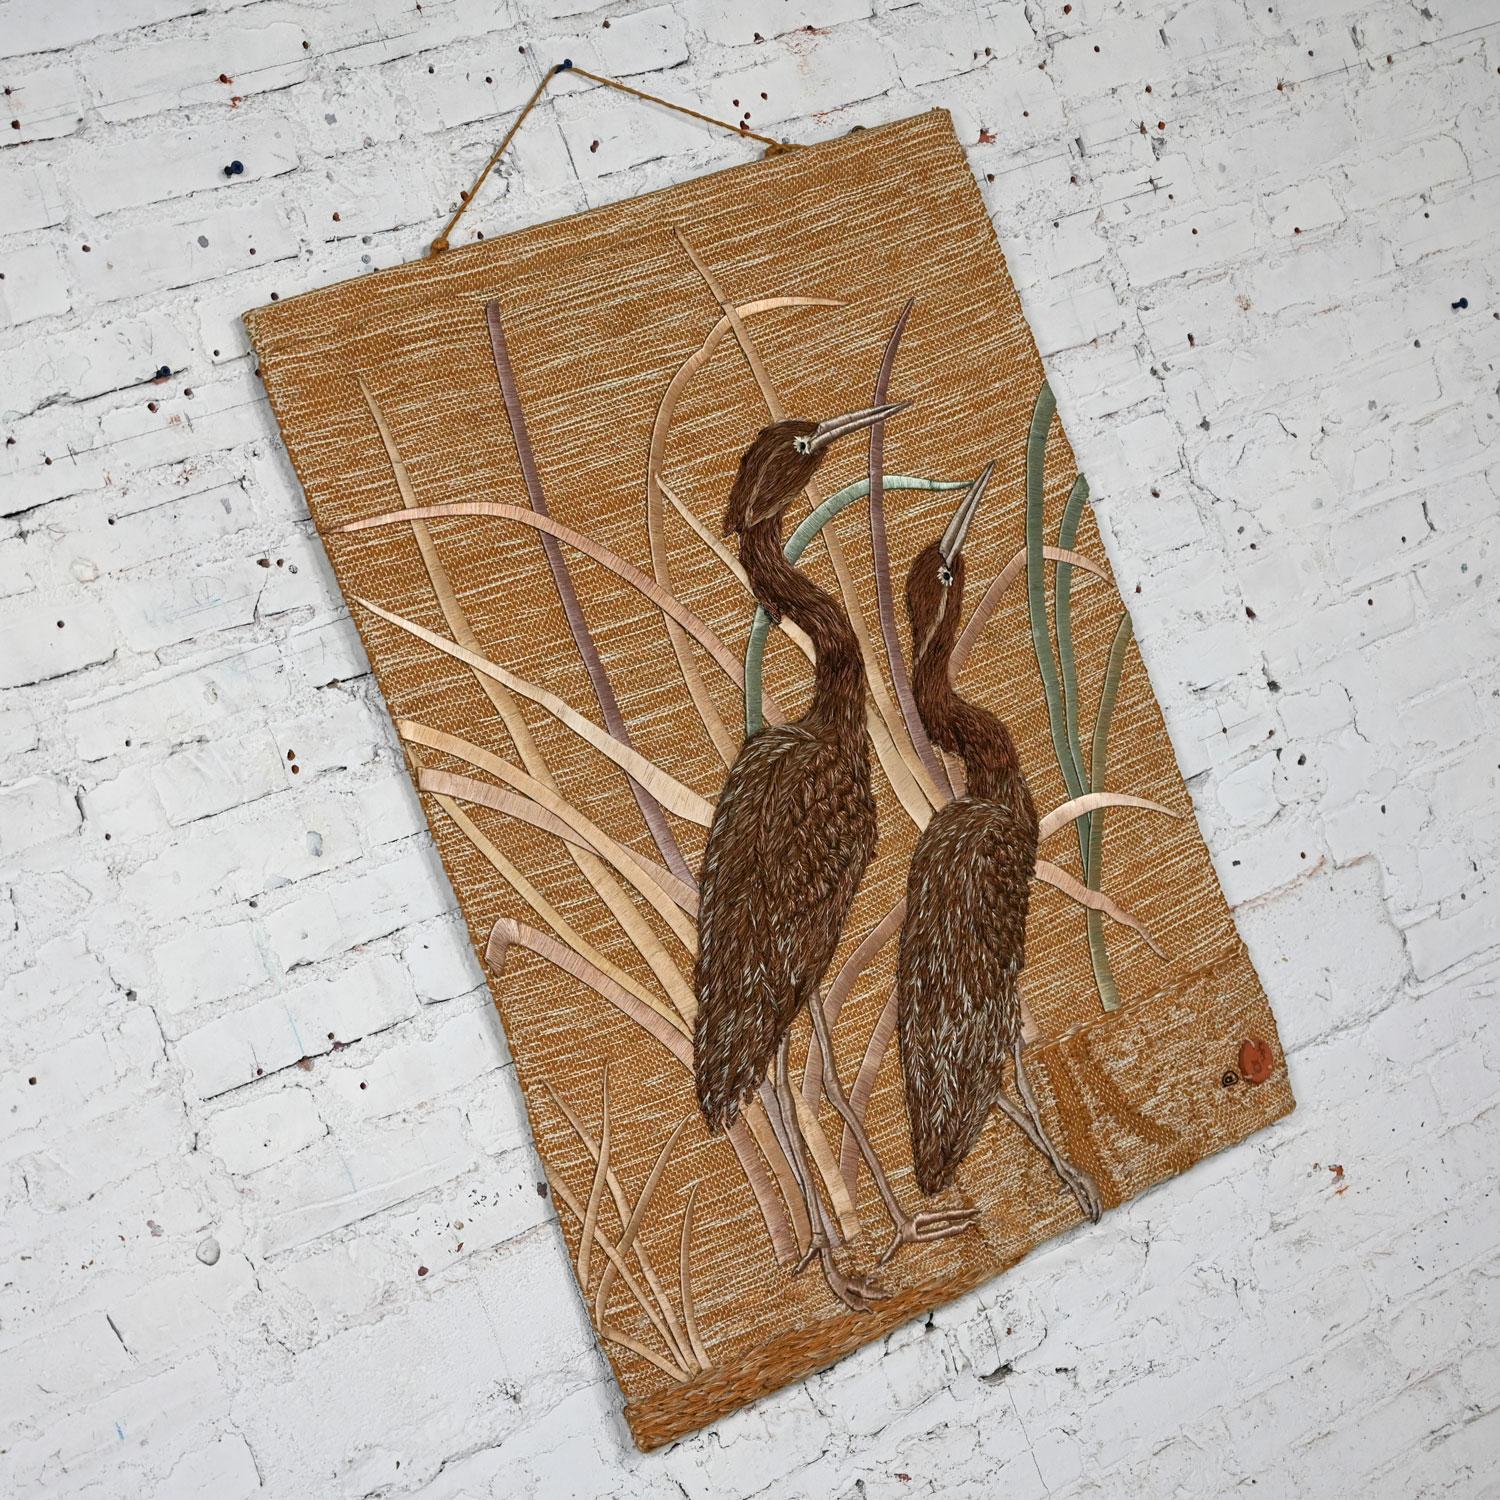 1992 Modern Textile Woven Cranes & Grass Wall Hanging #418 by Don Freedman  In Good Condition For Sale In Topeka, KS